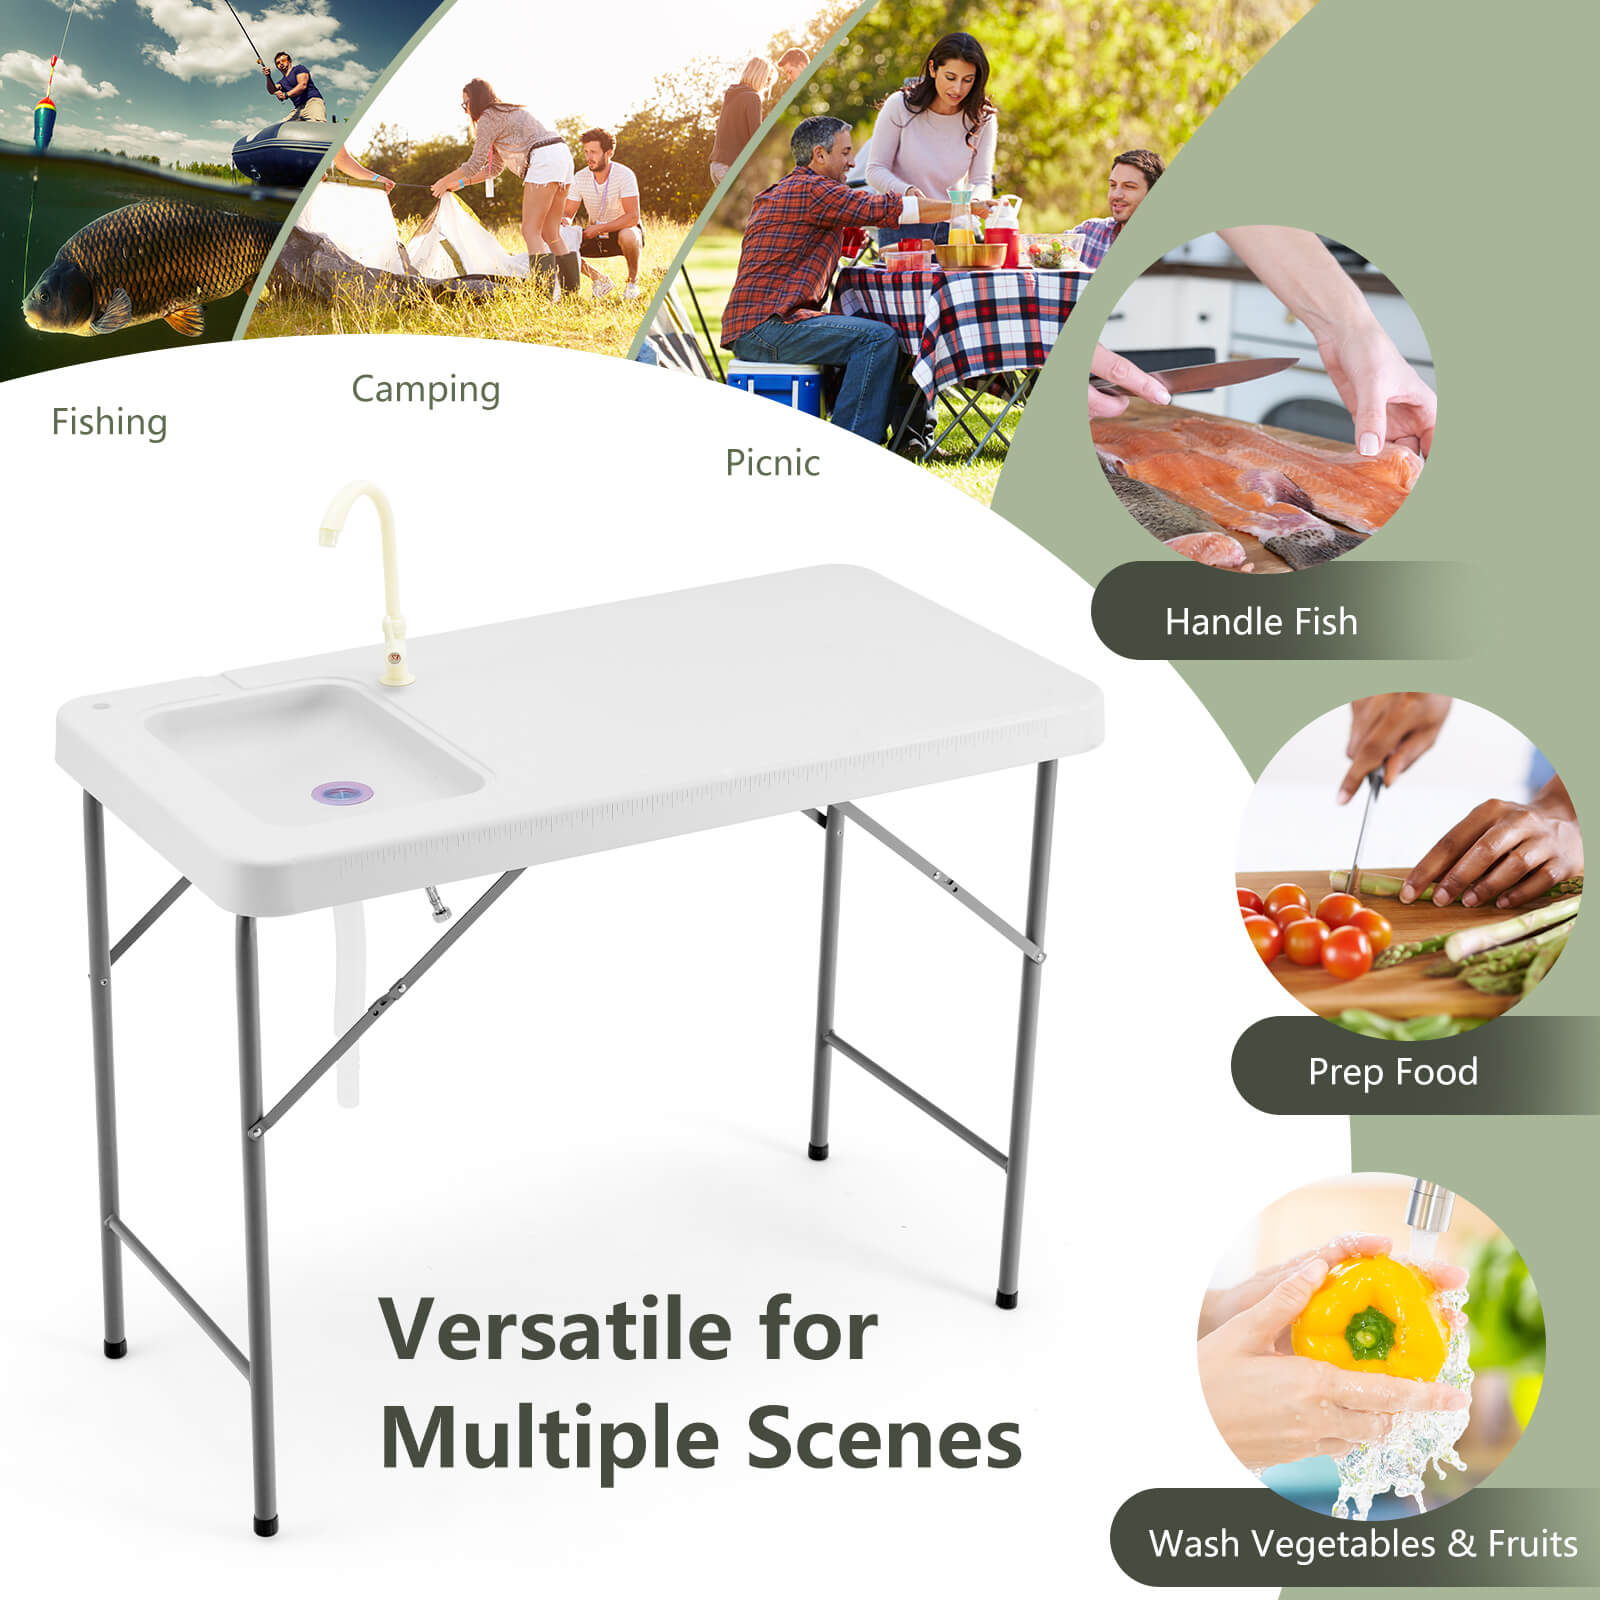 Portable_Folding_Camping_Table_with_Sink_and_Rotatable_Faucet_for_Fish_Cleaning-8.jpg